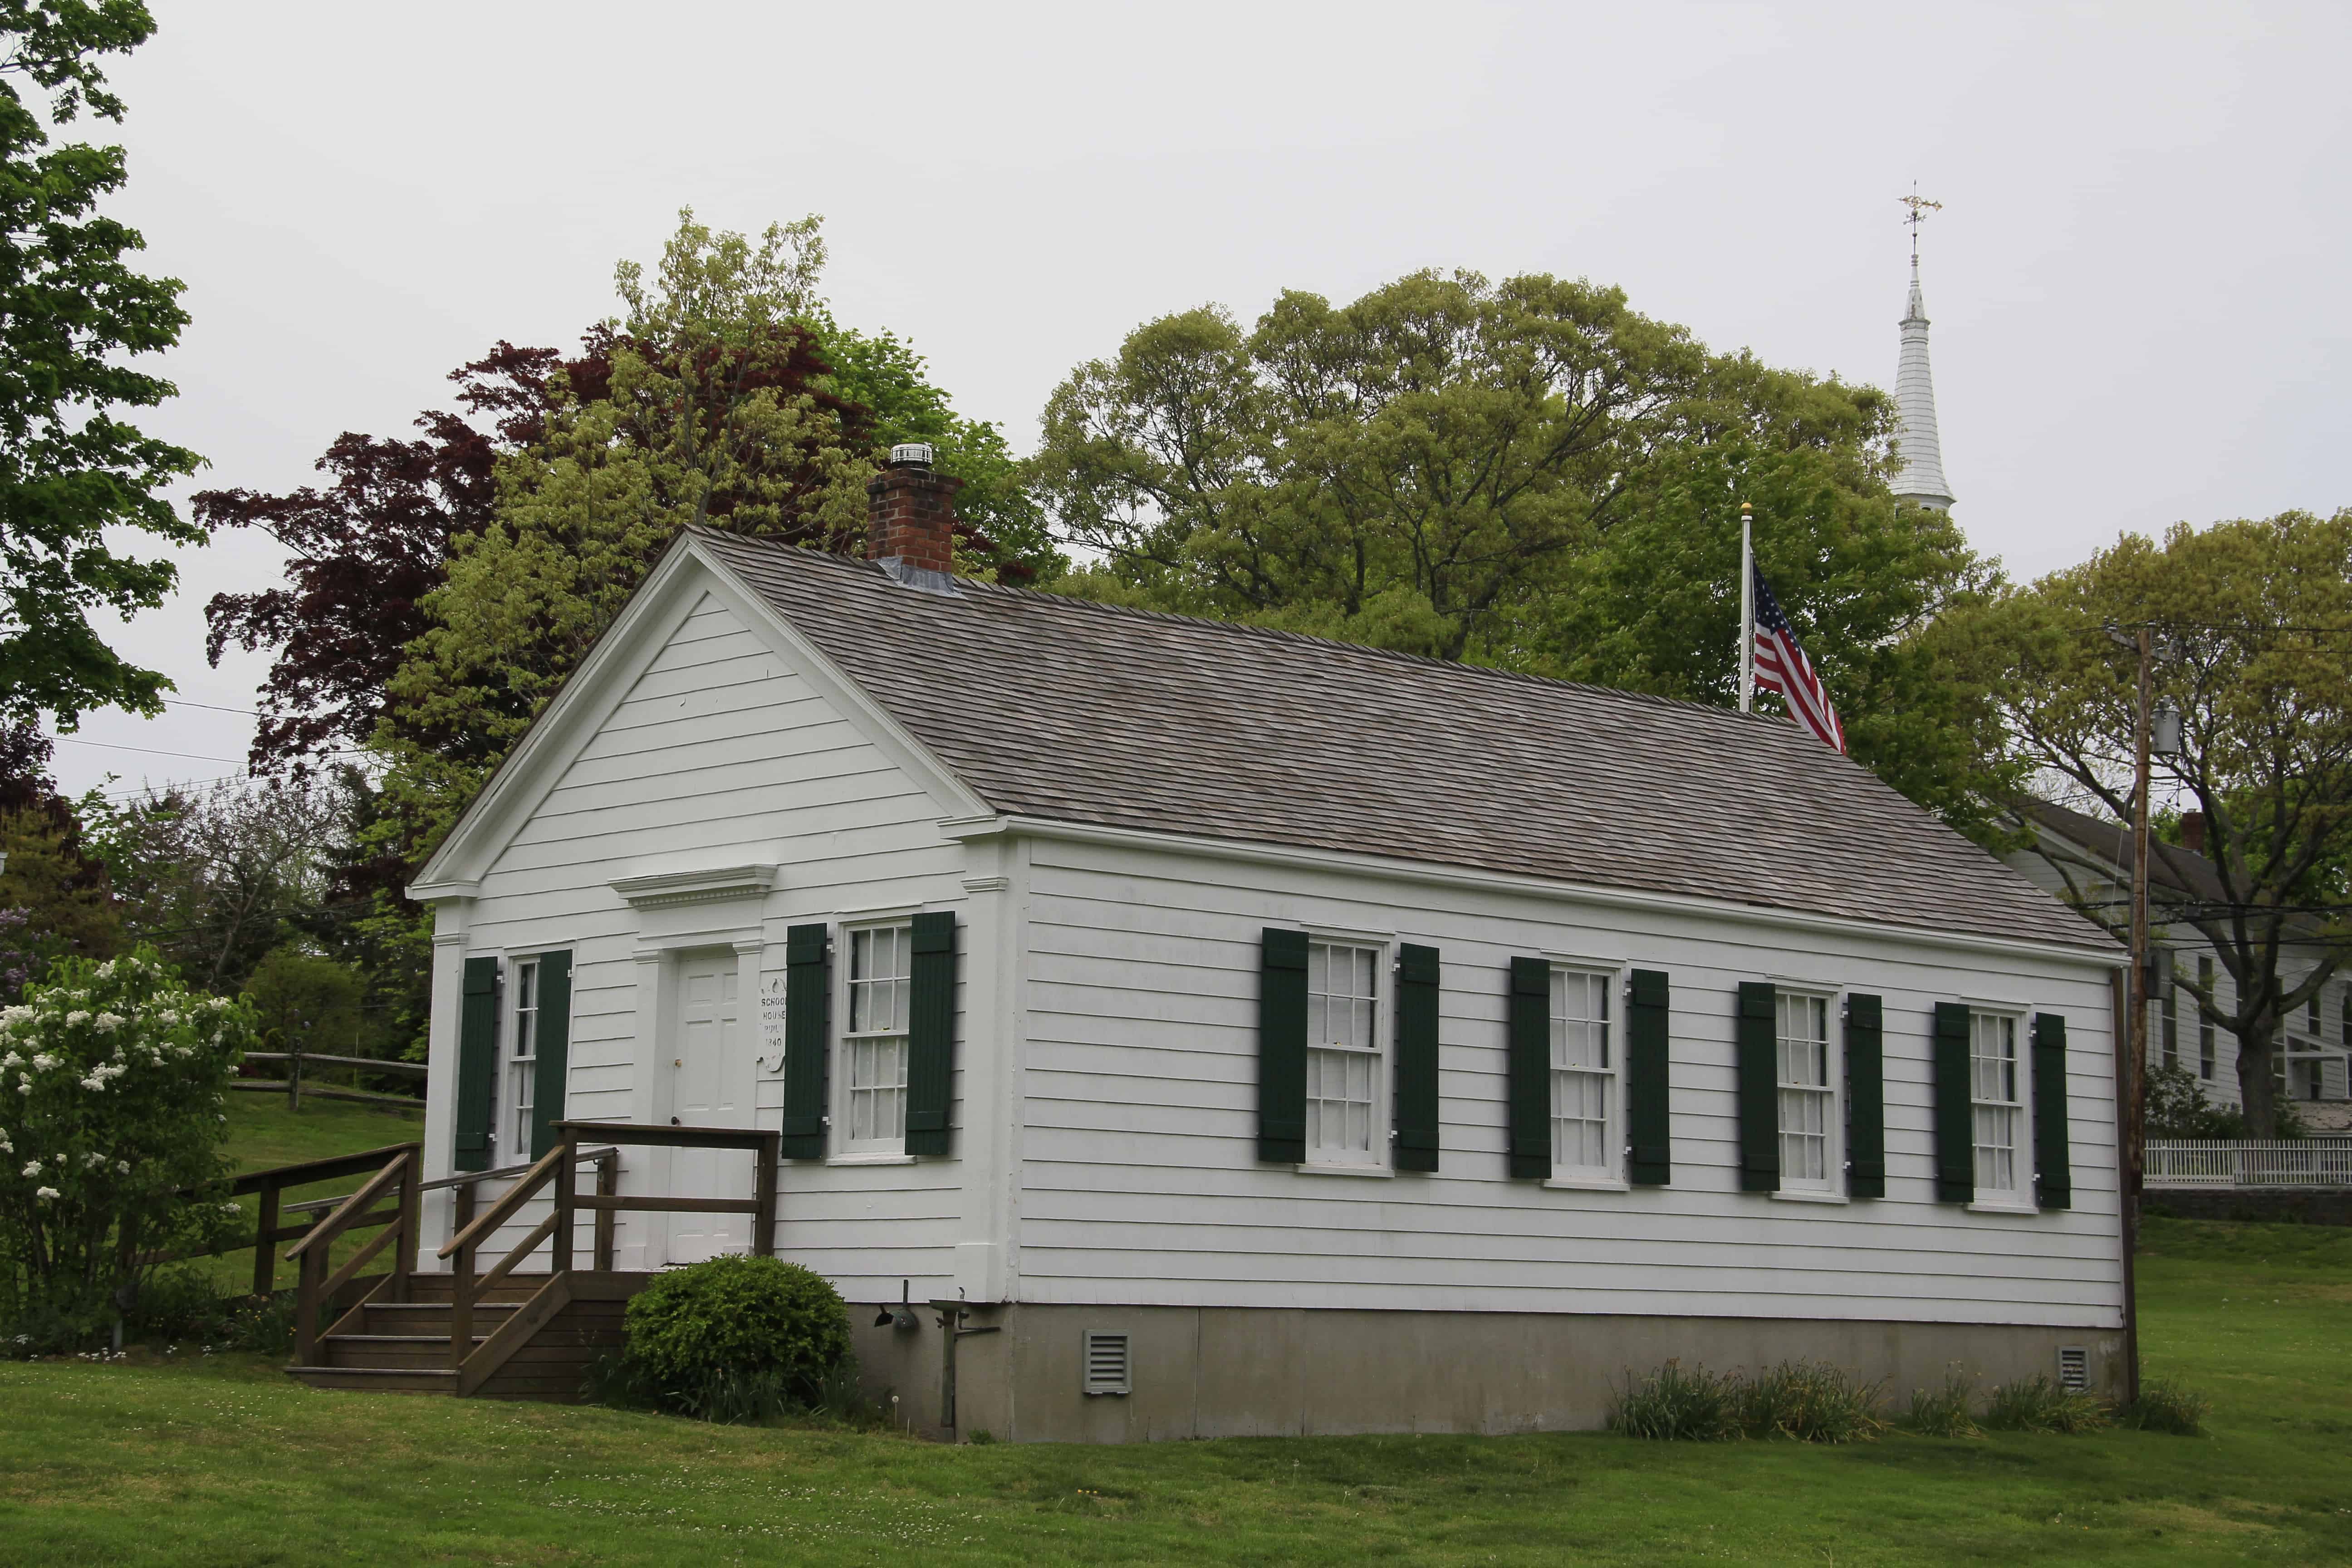 school house images